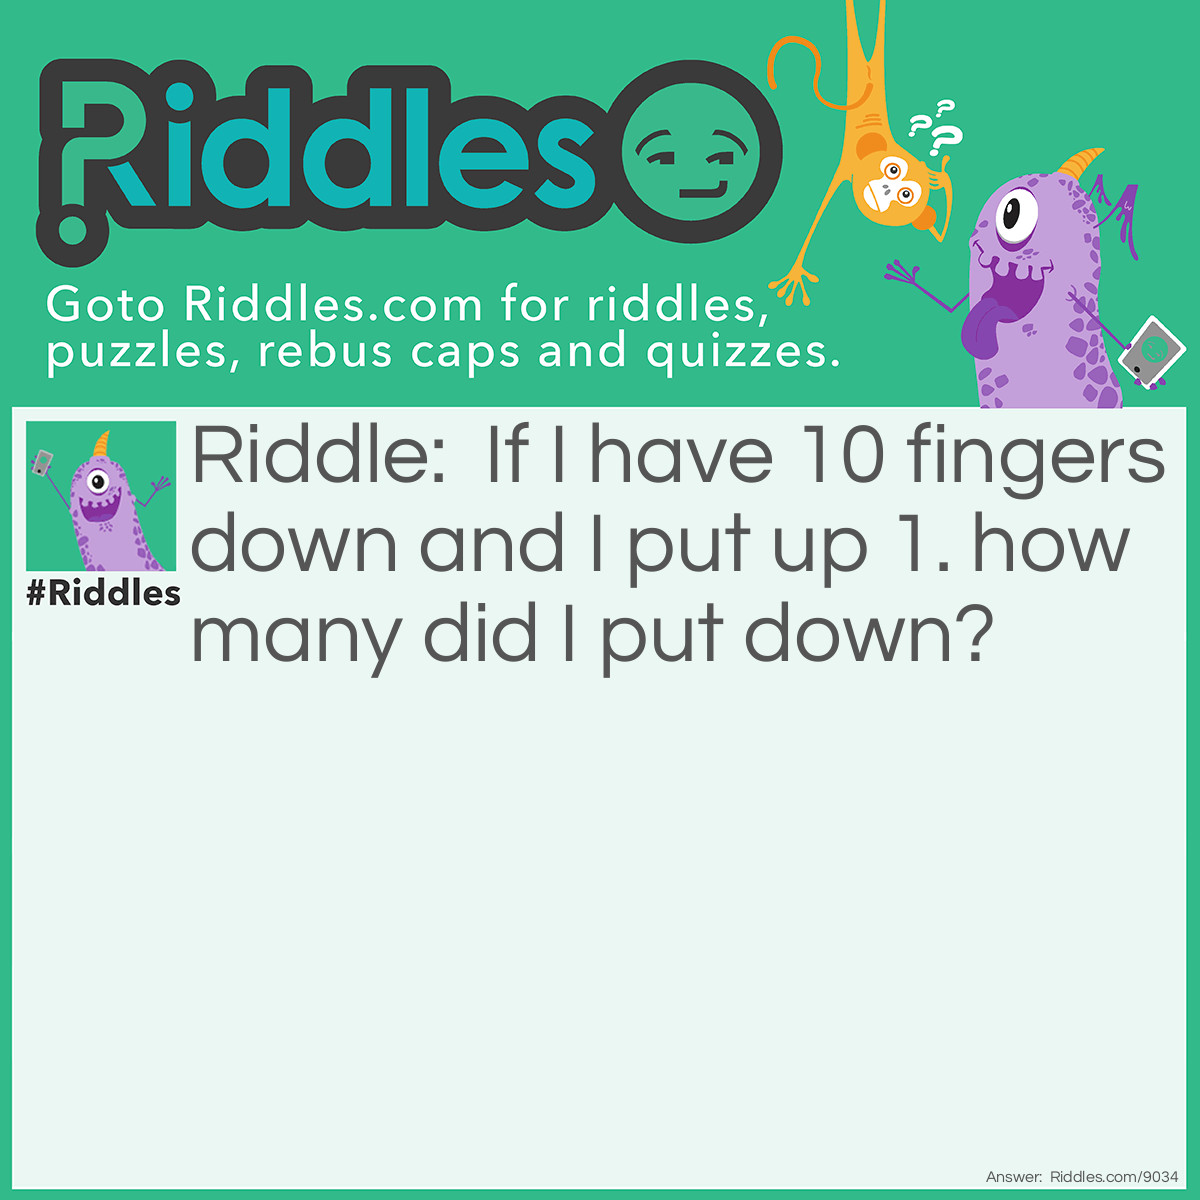 Riddle: If I have 10 fingers down and I put up 1. how many did I put down? Answer: The answer is 0. I already "HAVE" 10 fingers down.